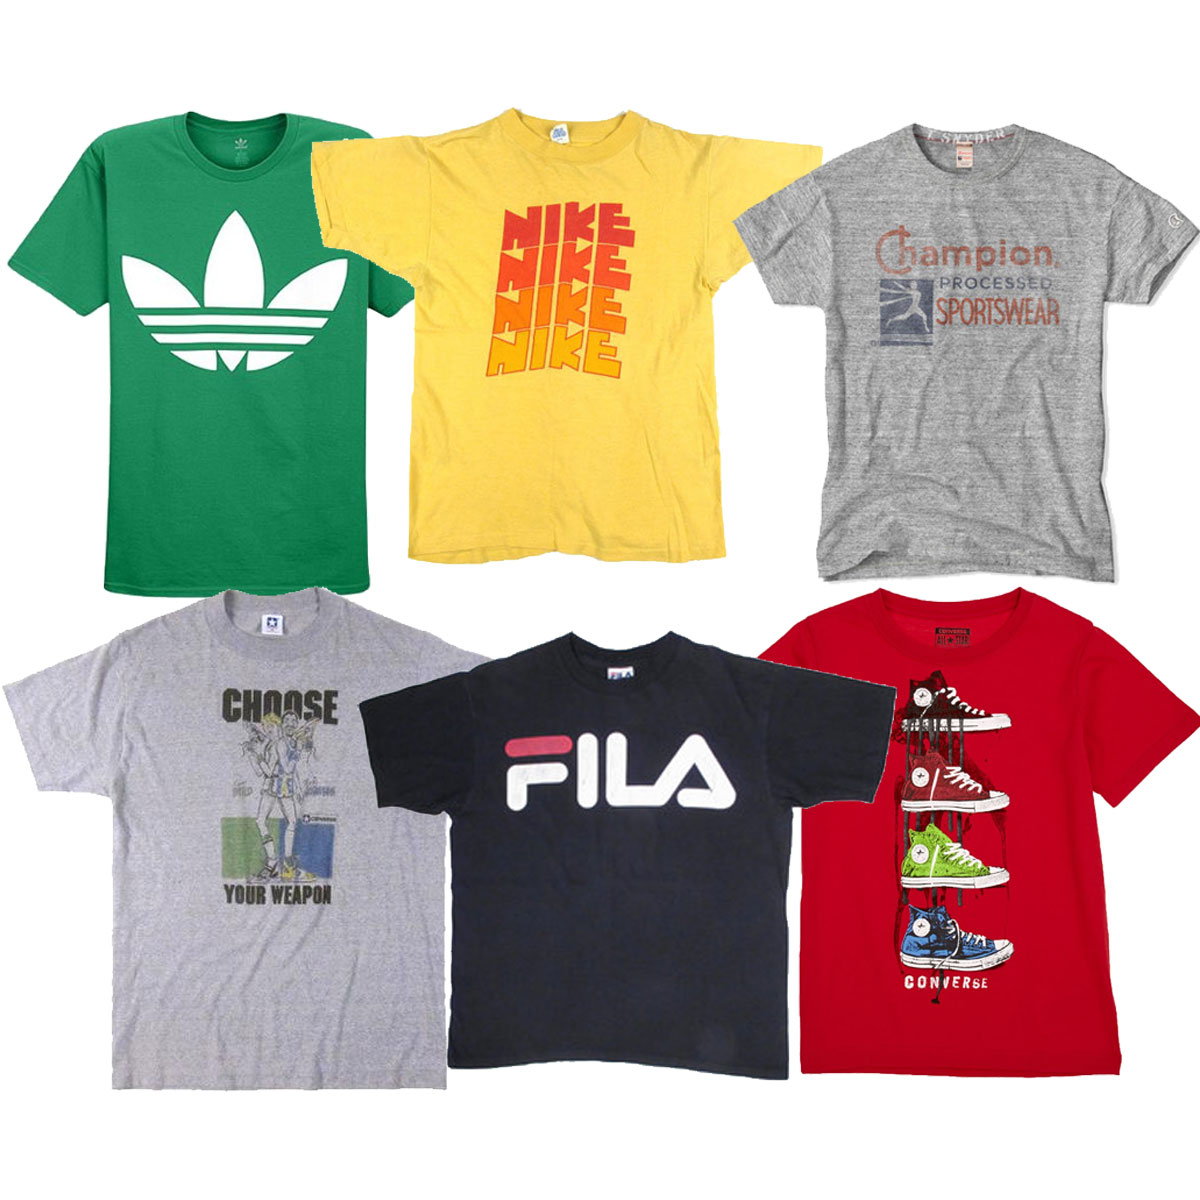 Sports Wear (Branded) T-shirts - Dust Factory Vintage